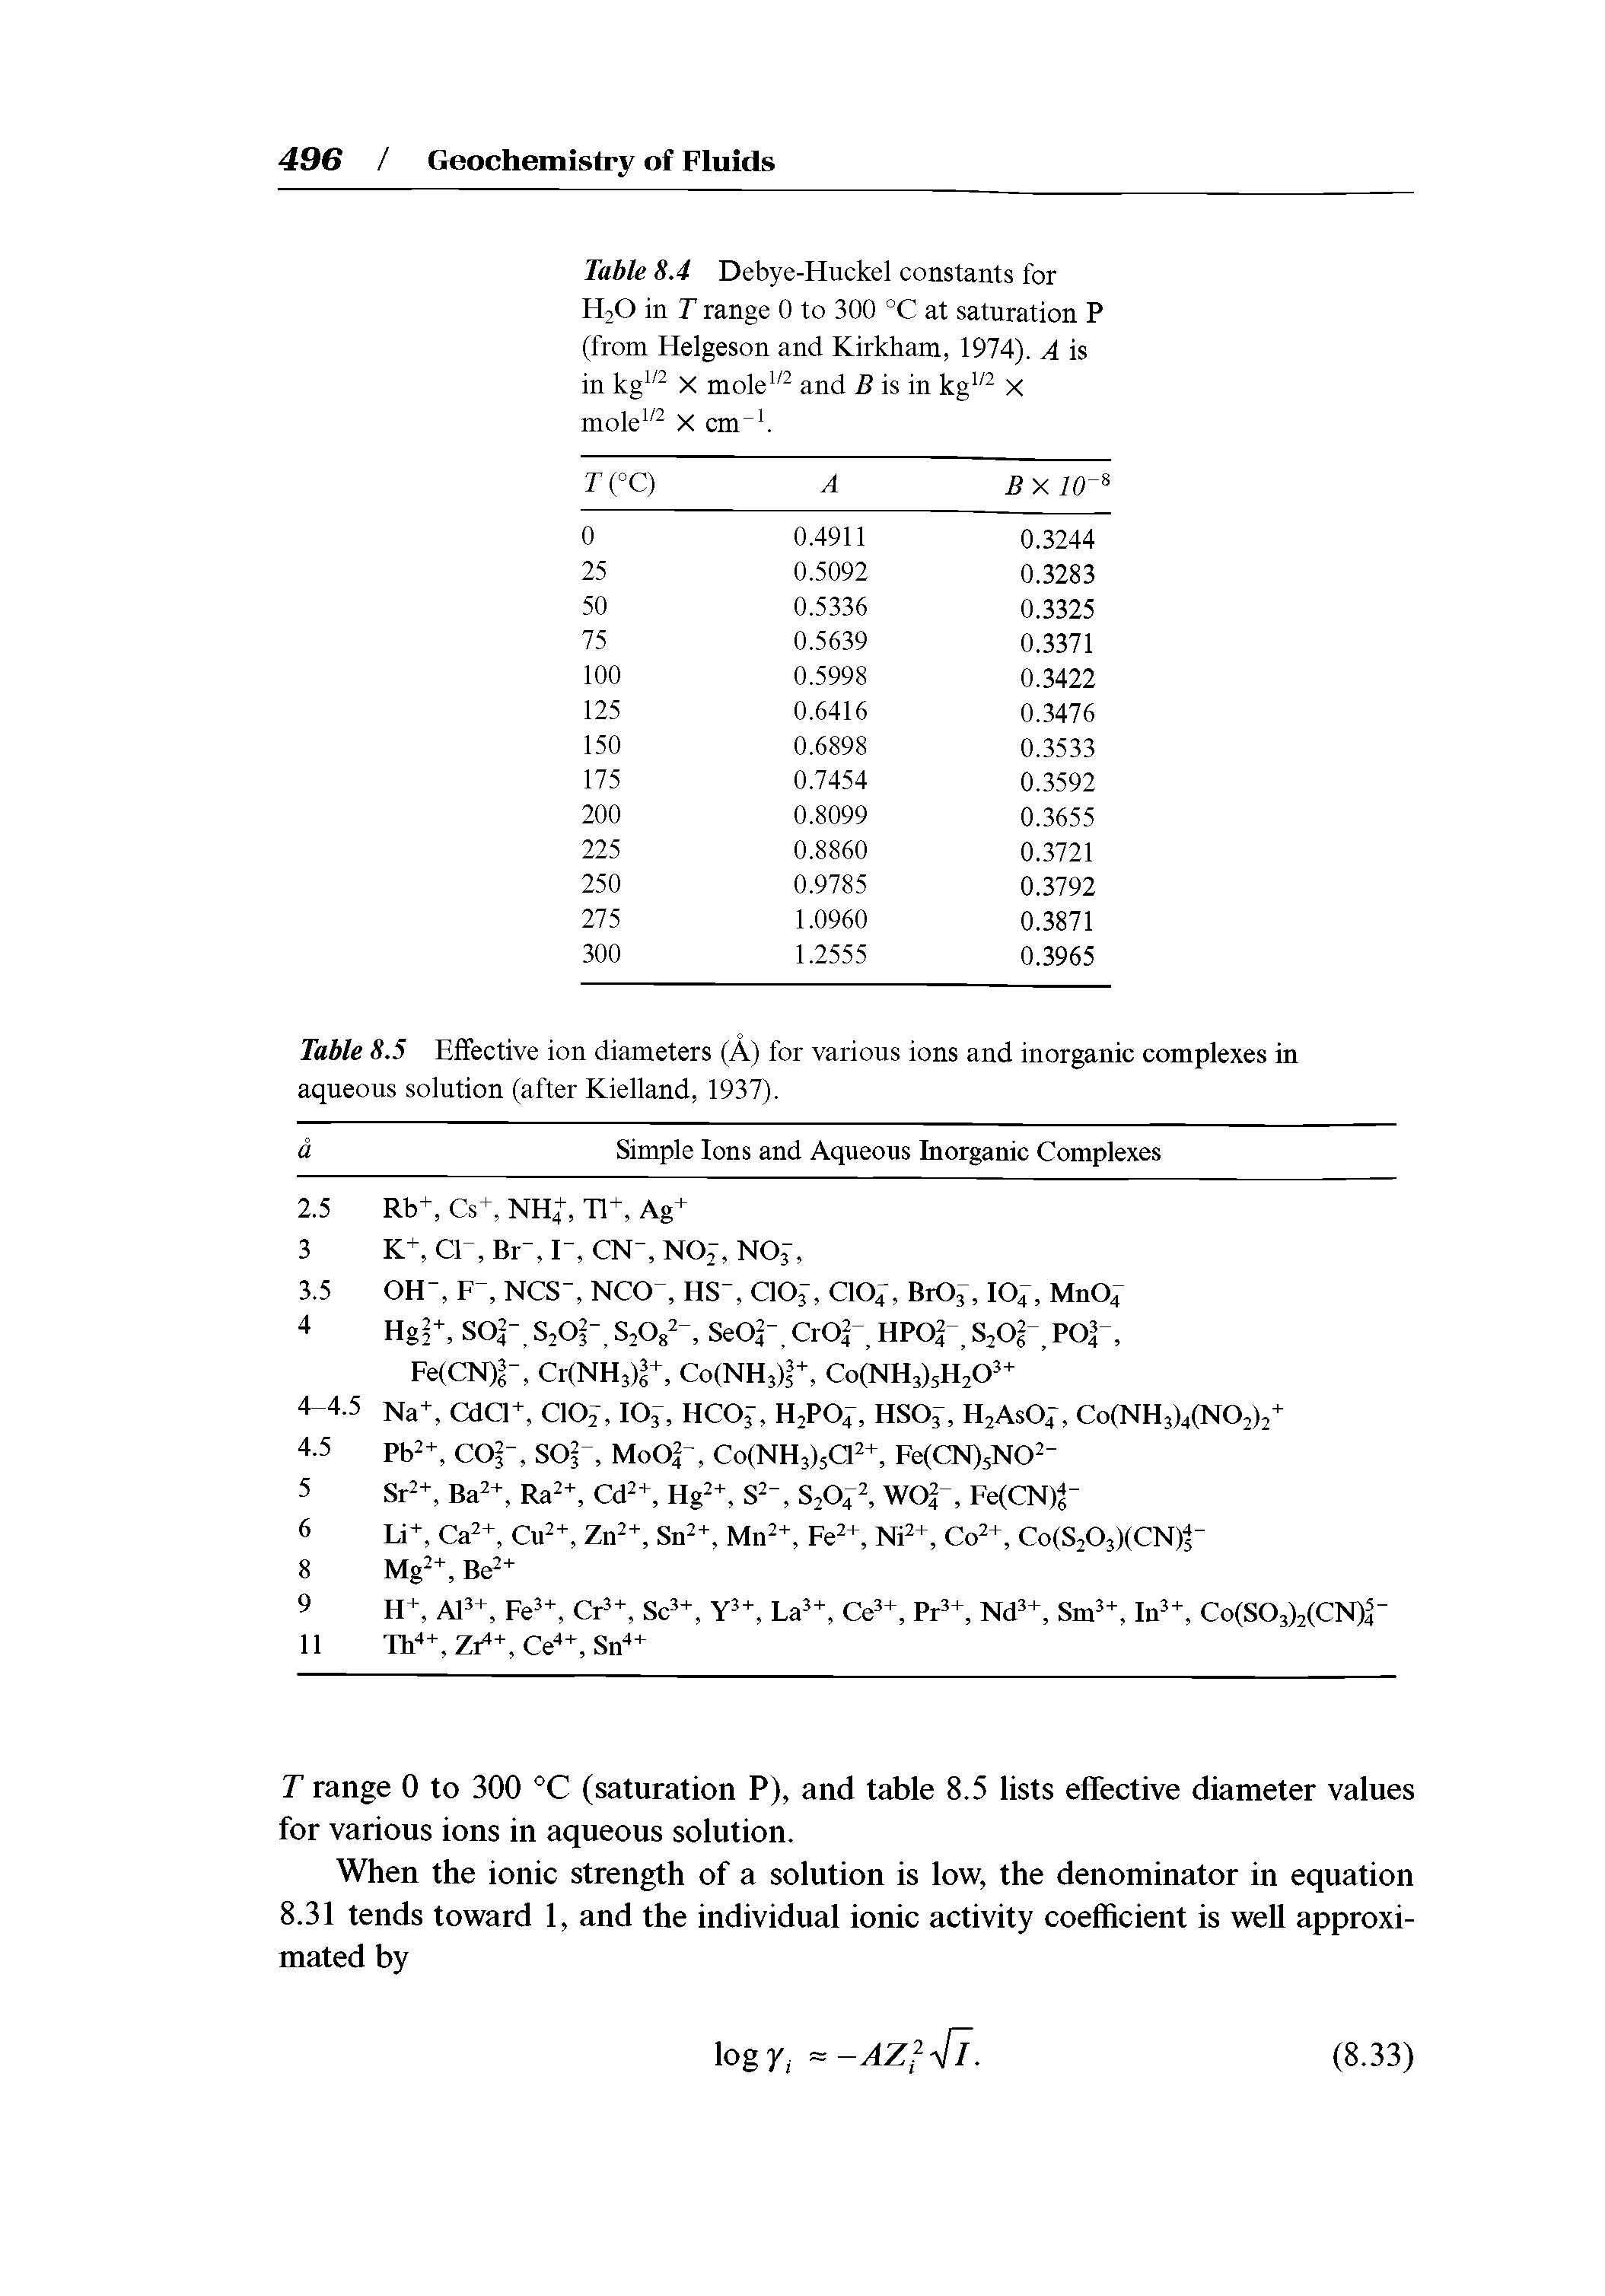 Table 8.5 Effective ion diameters (A) for various ions and inorganic complexes in aqueous solution (after Kielland, 1937).